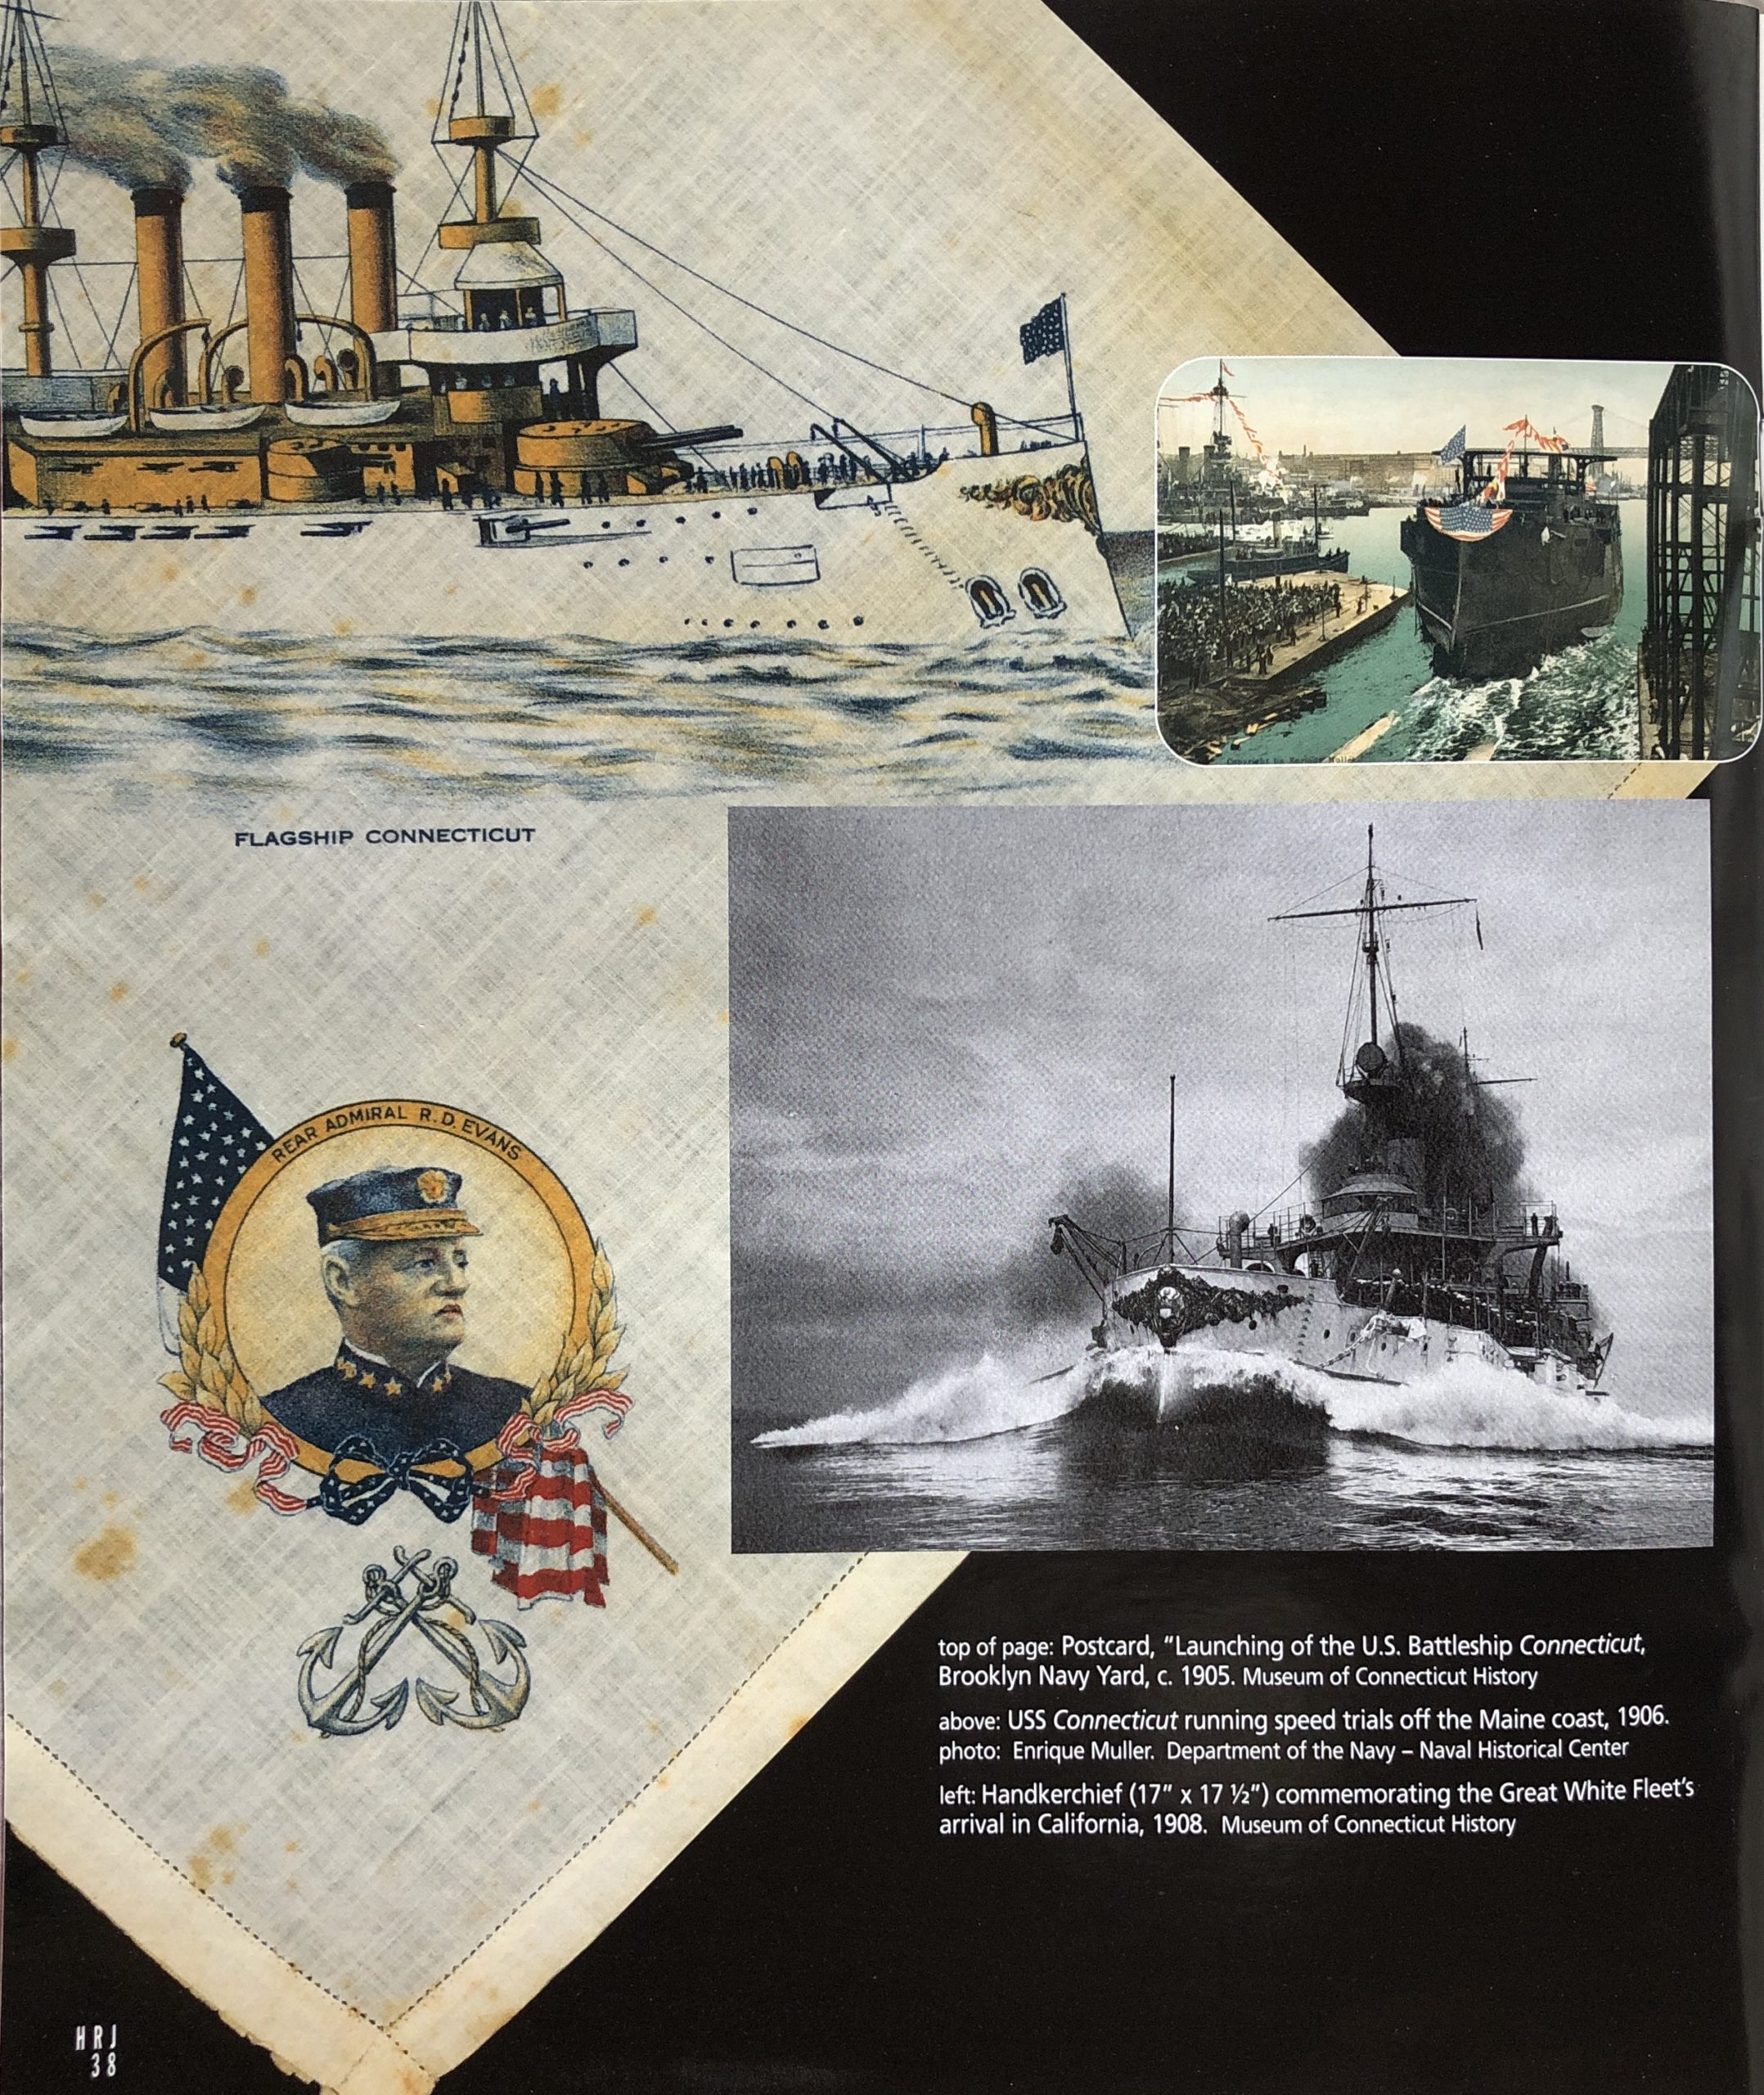 What does connecticut have a strong maritime tradition?